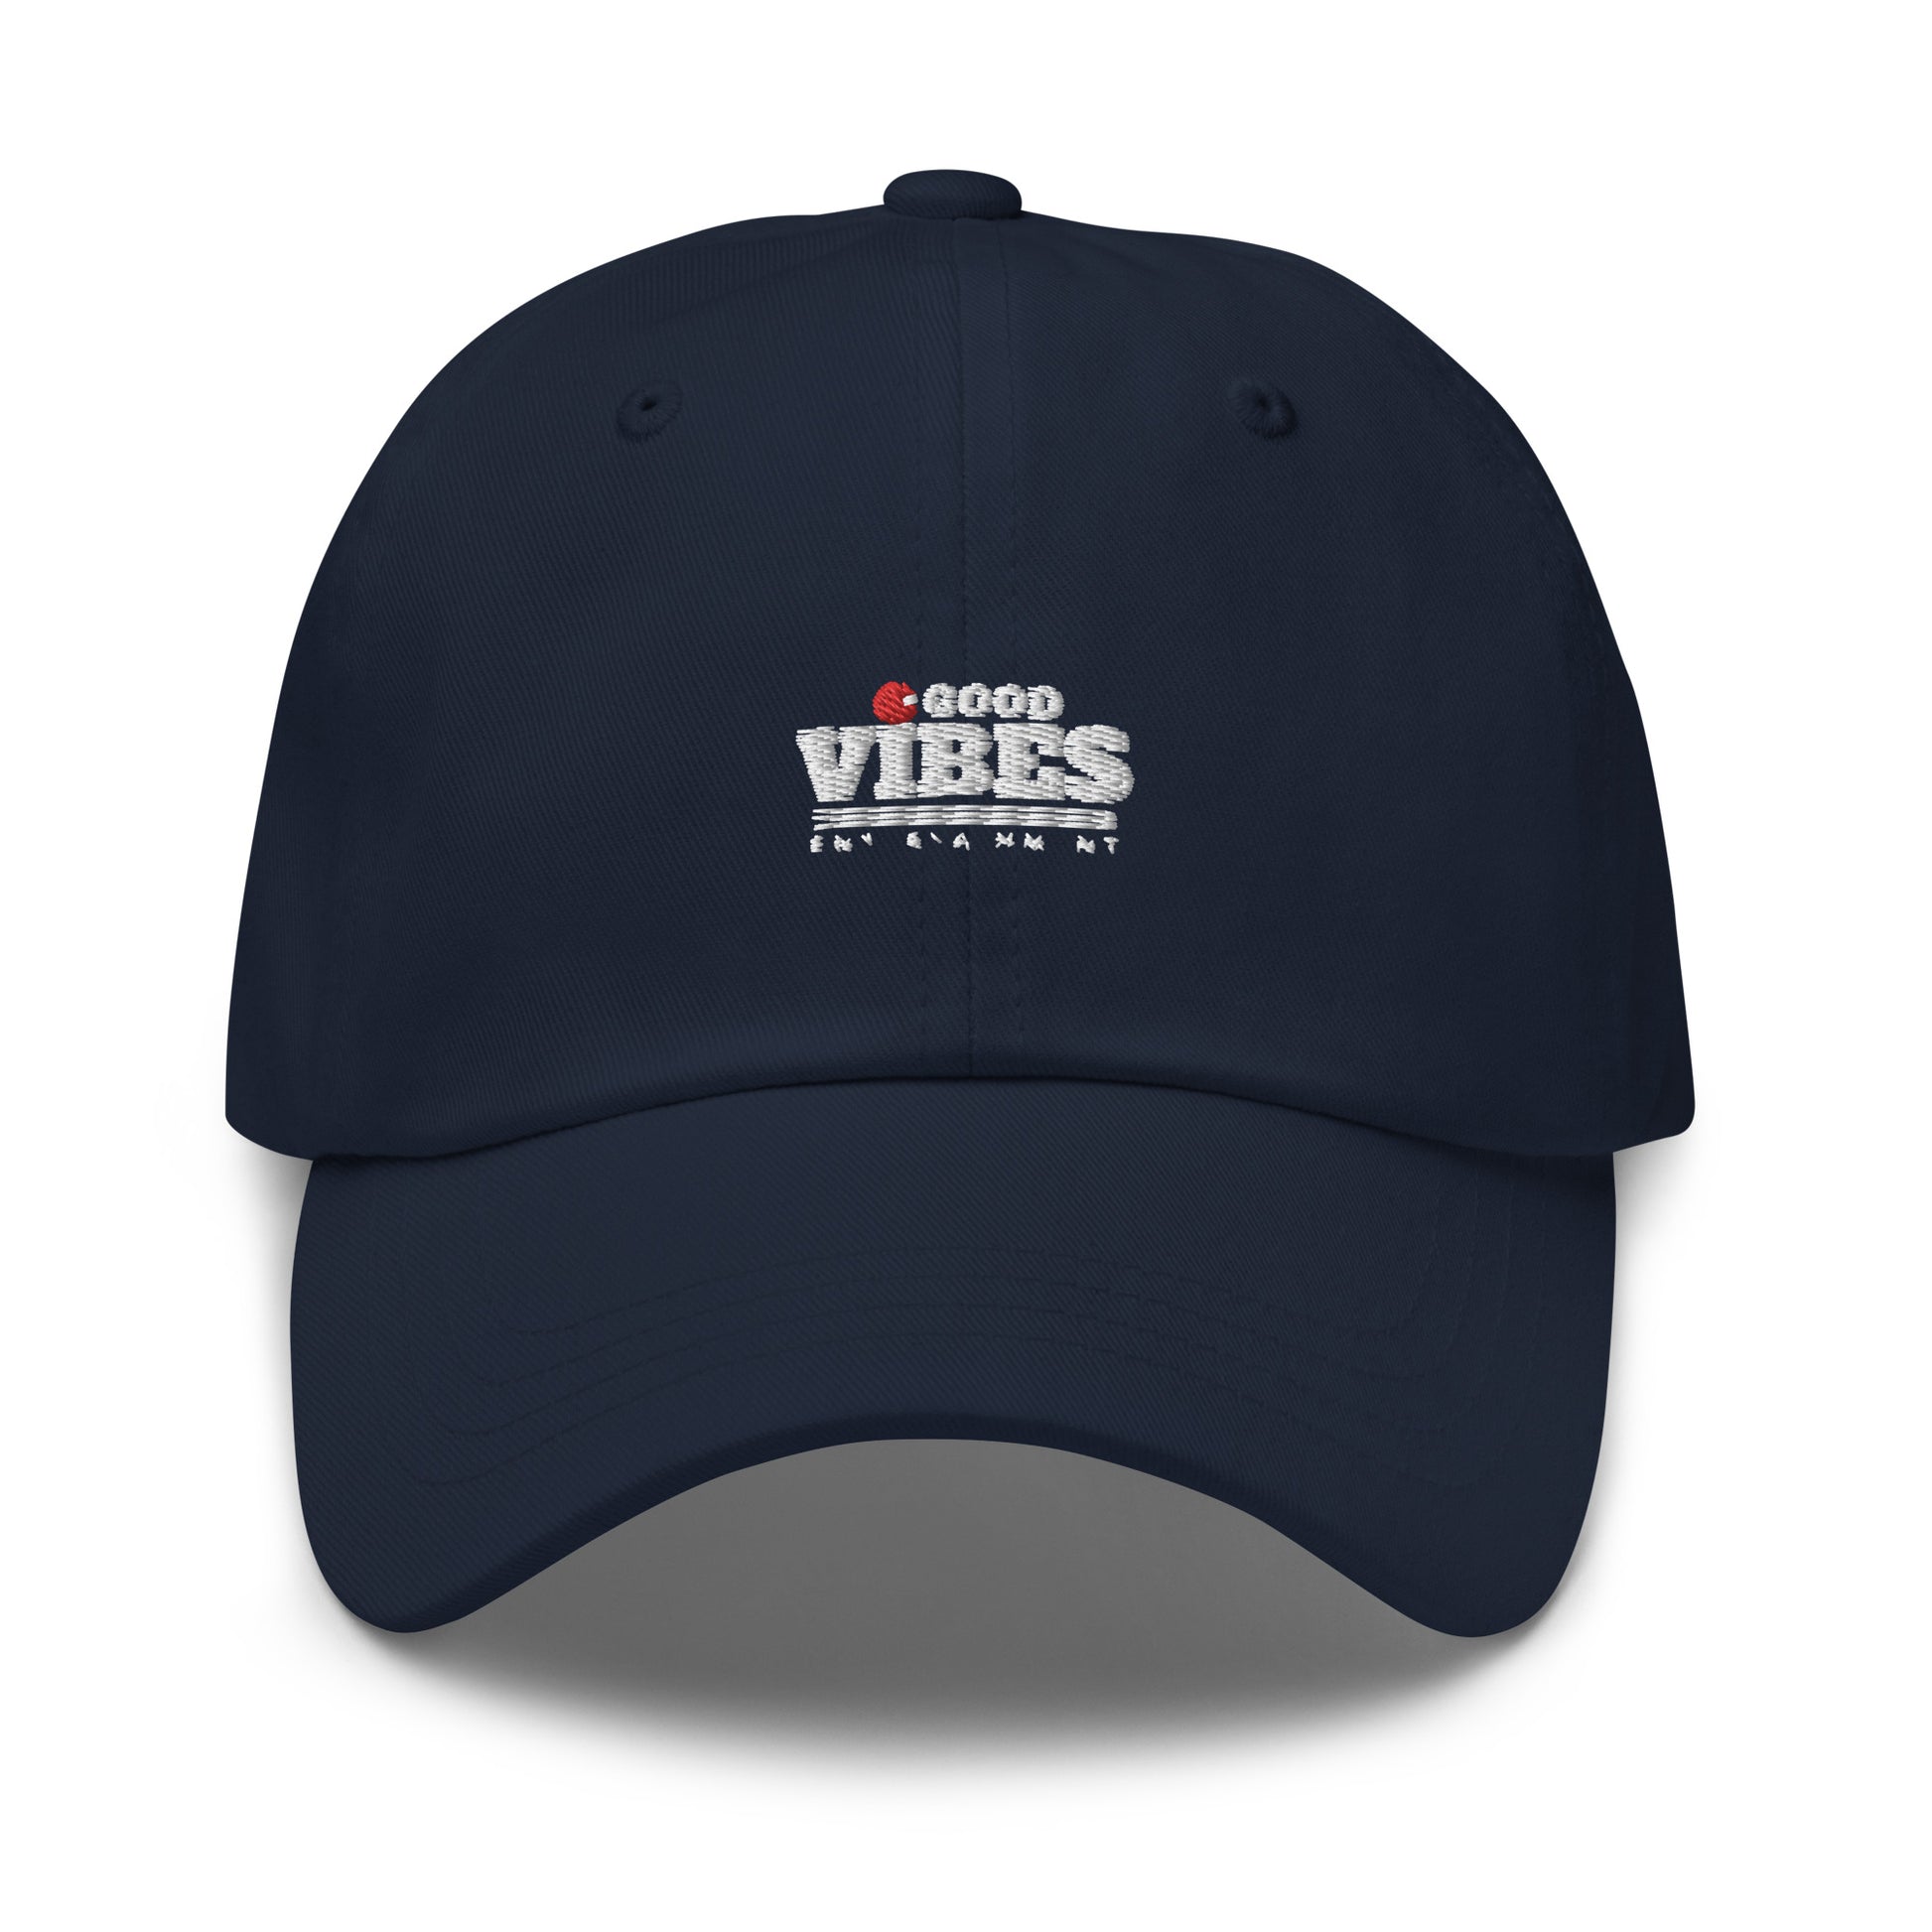 classic dad hat cap midnight navy with goodvibes entertainment logo white